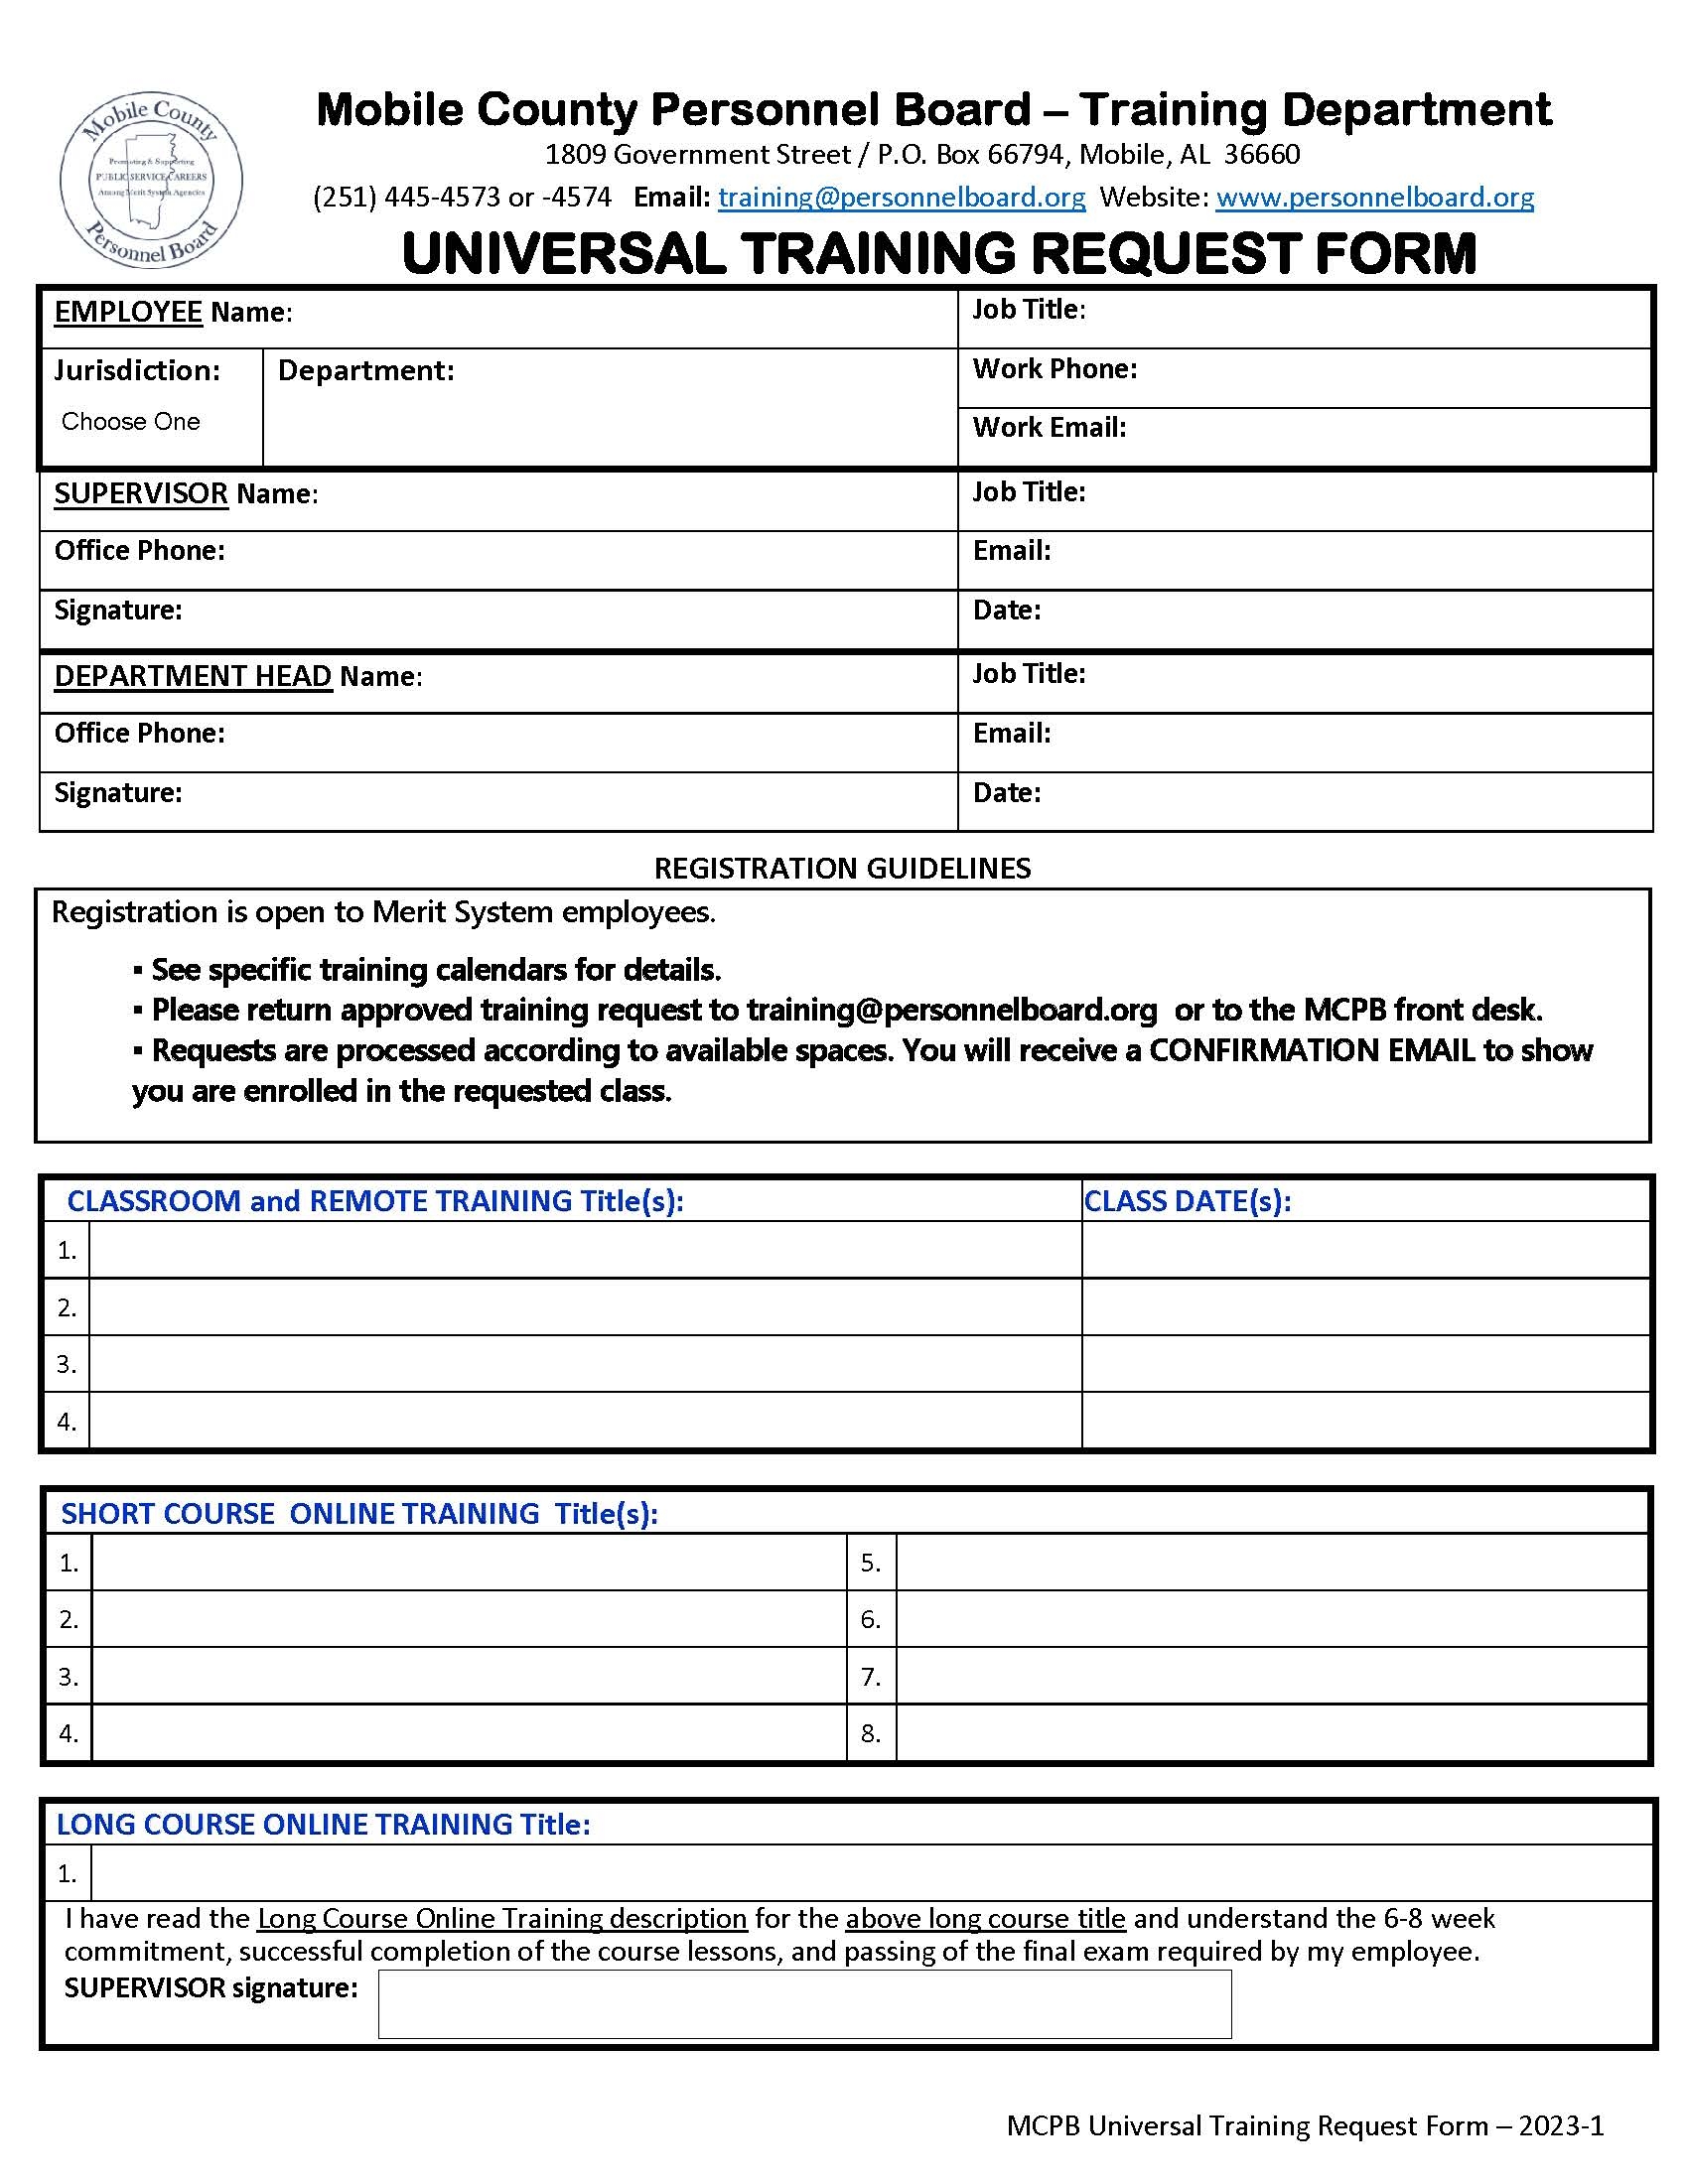 universal training request form icon